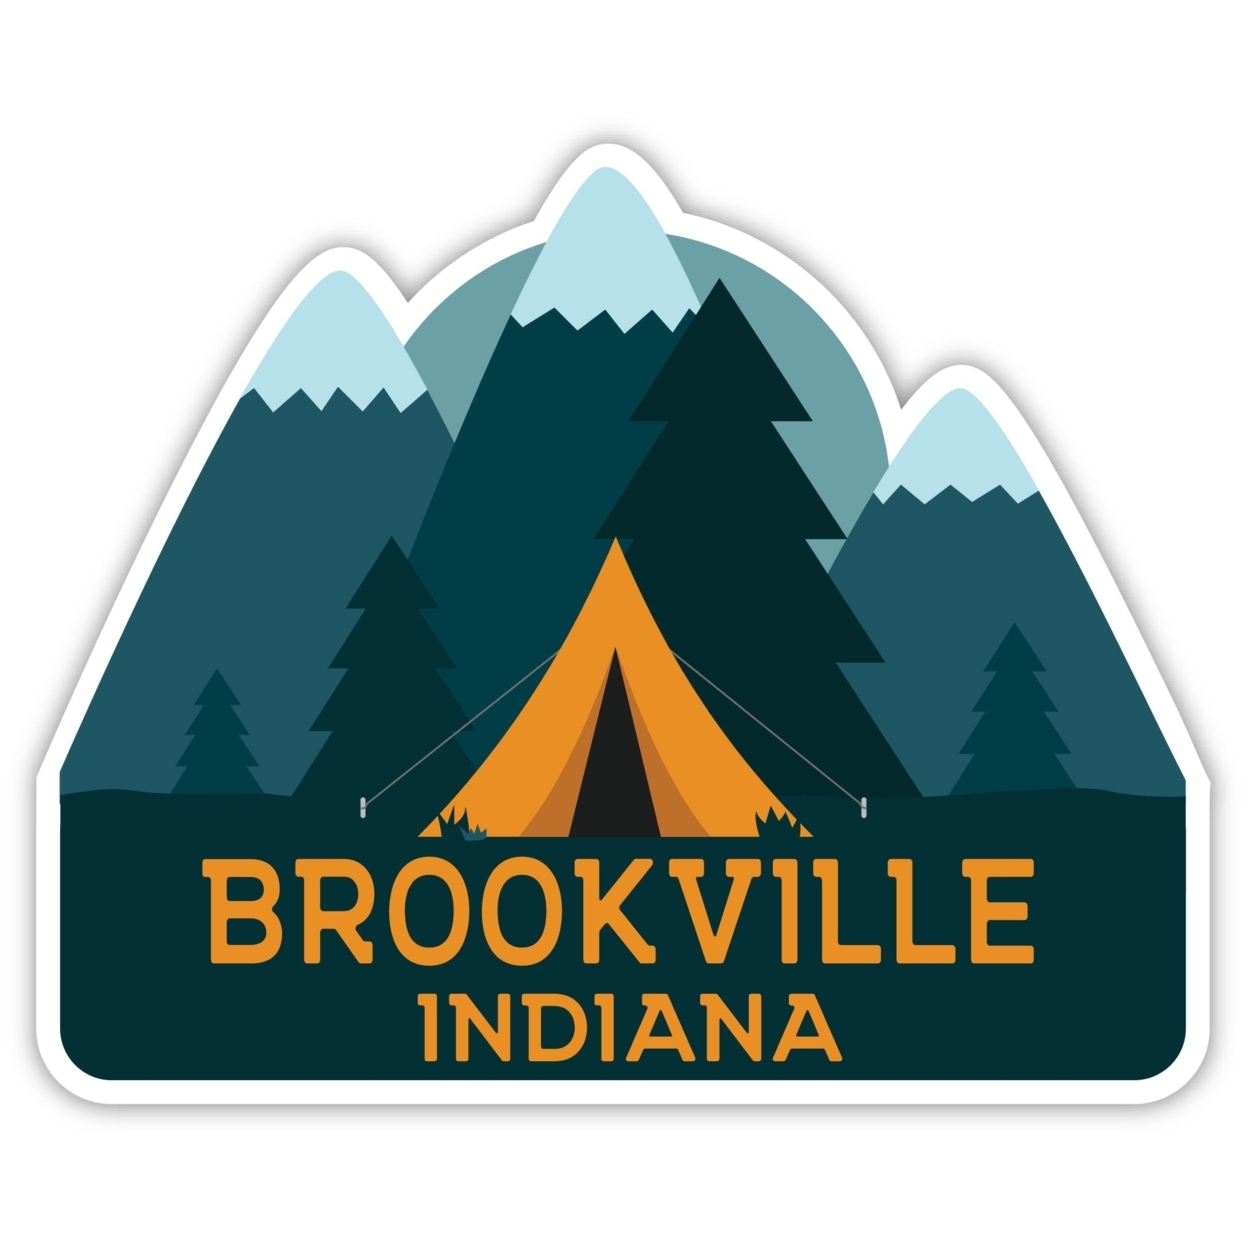 Brookville Indiana Souvenir Decorative Stickers (Choose Theme And Size) - 4-Pack, 12-Inch, Adventures Awaits